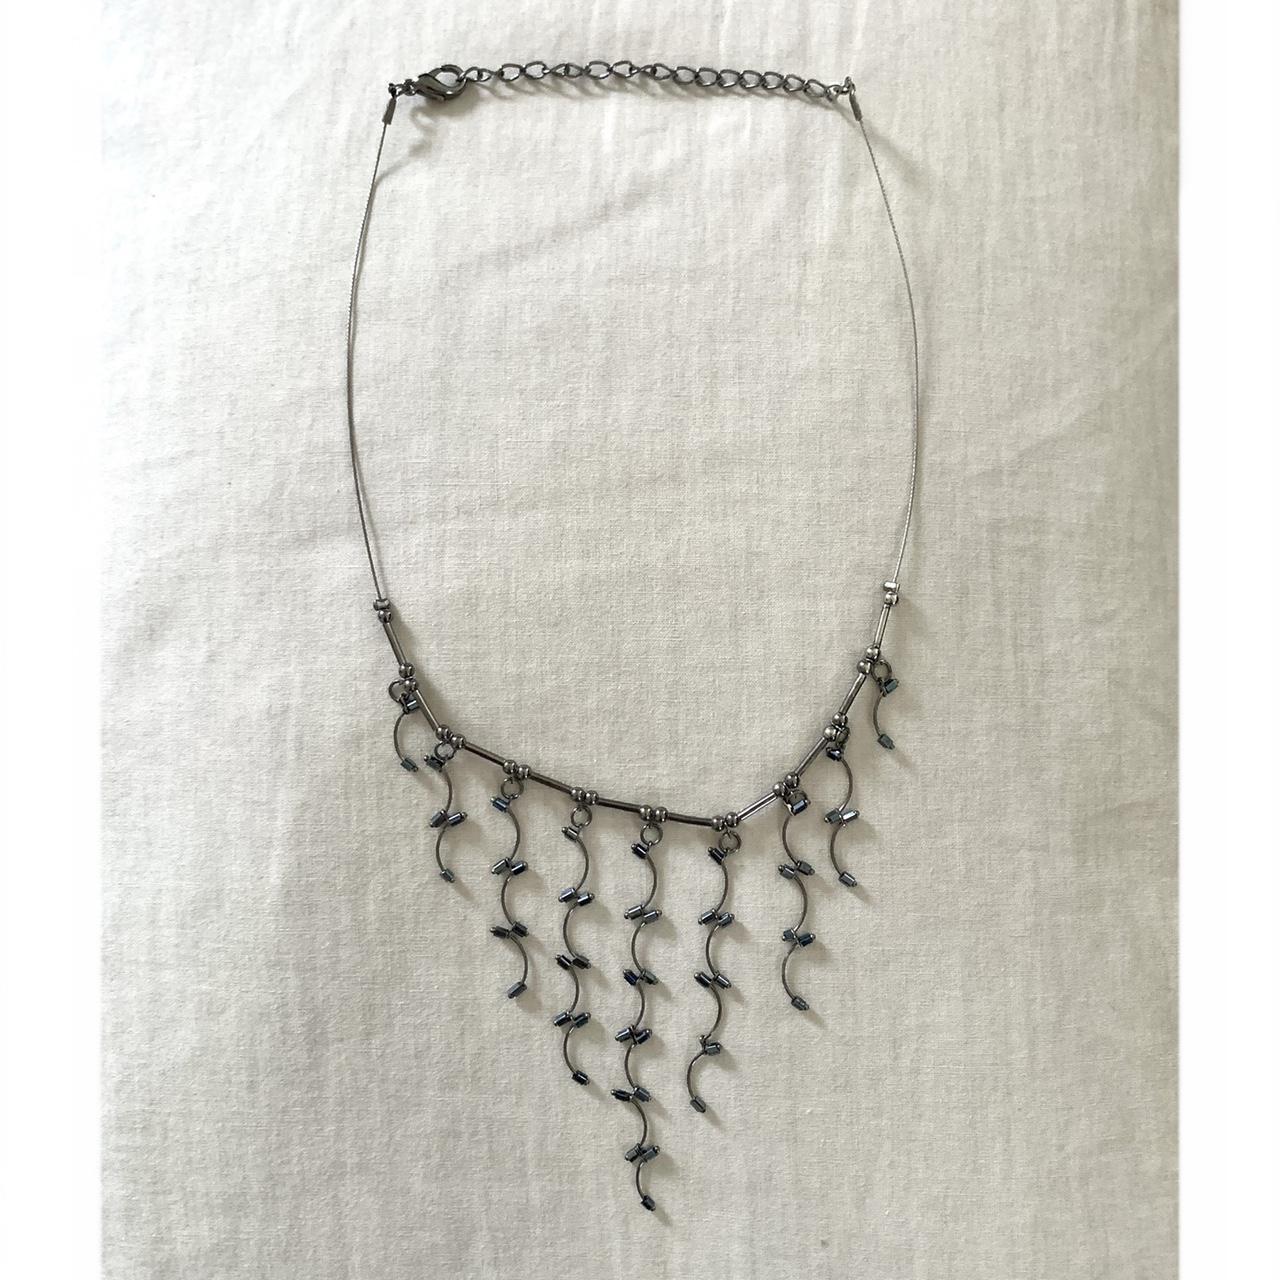 Product Image 3 - Metal wire bib choker necklace